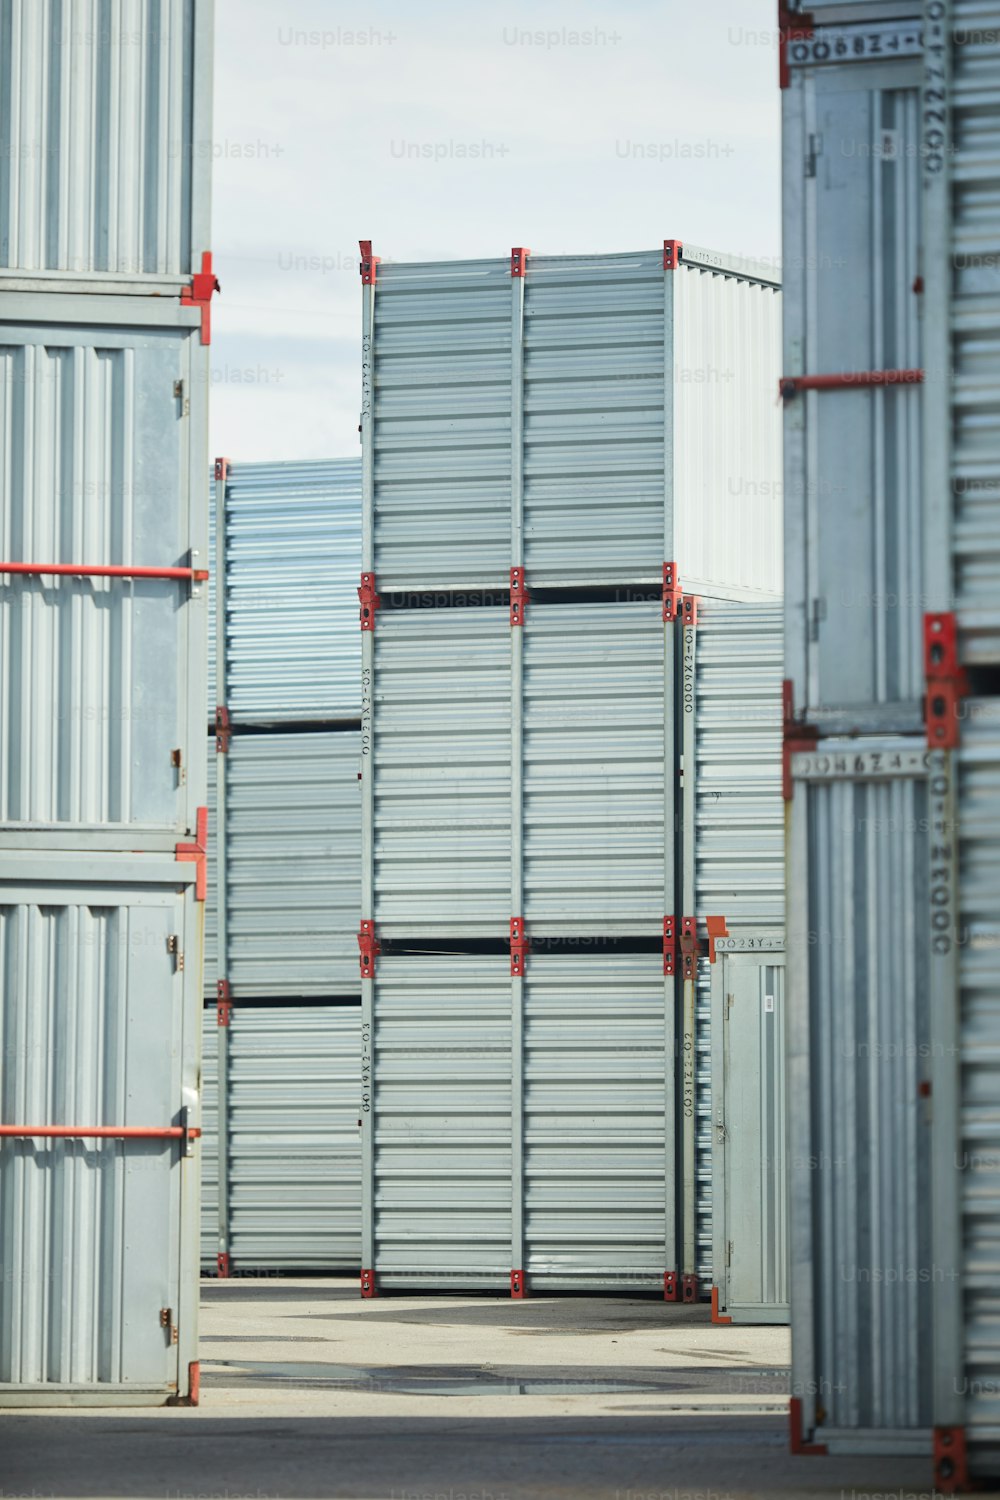 Stacks of new storage containers that can be used for storing cargo and other things or supplies